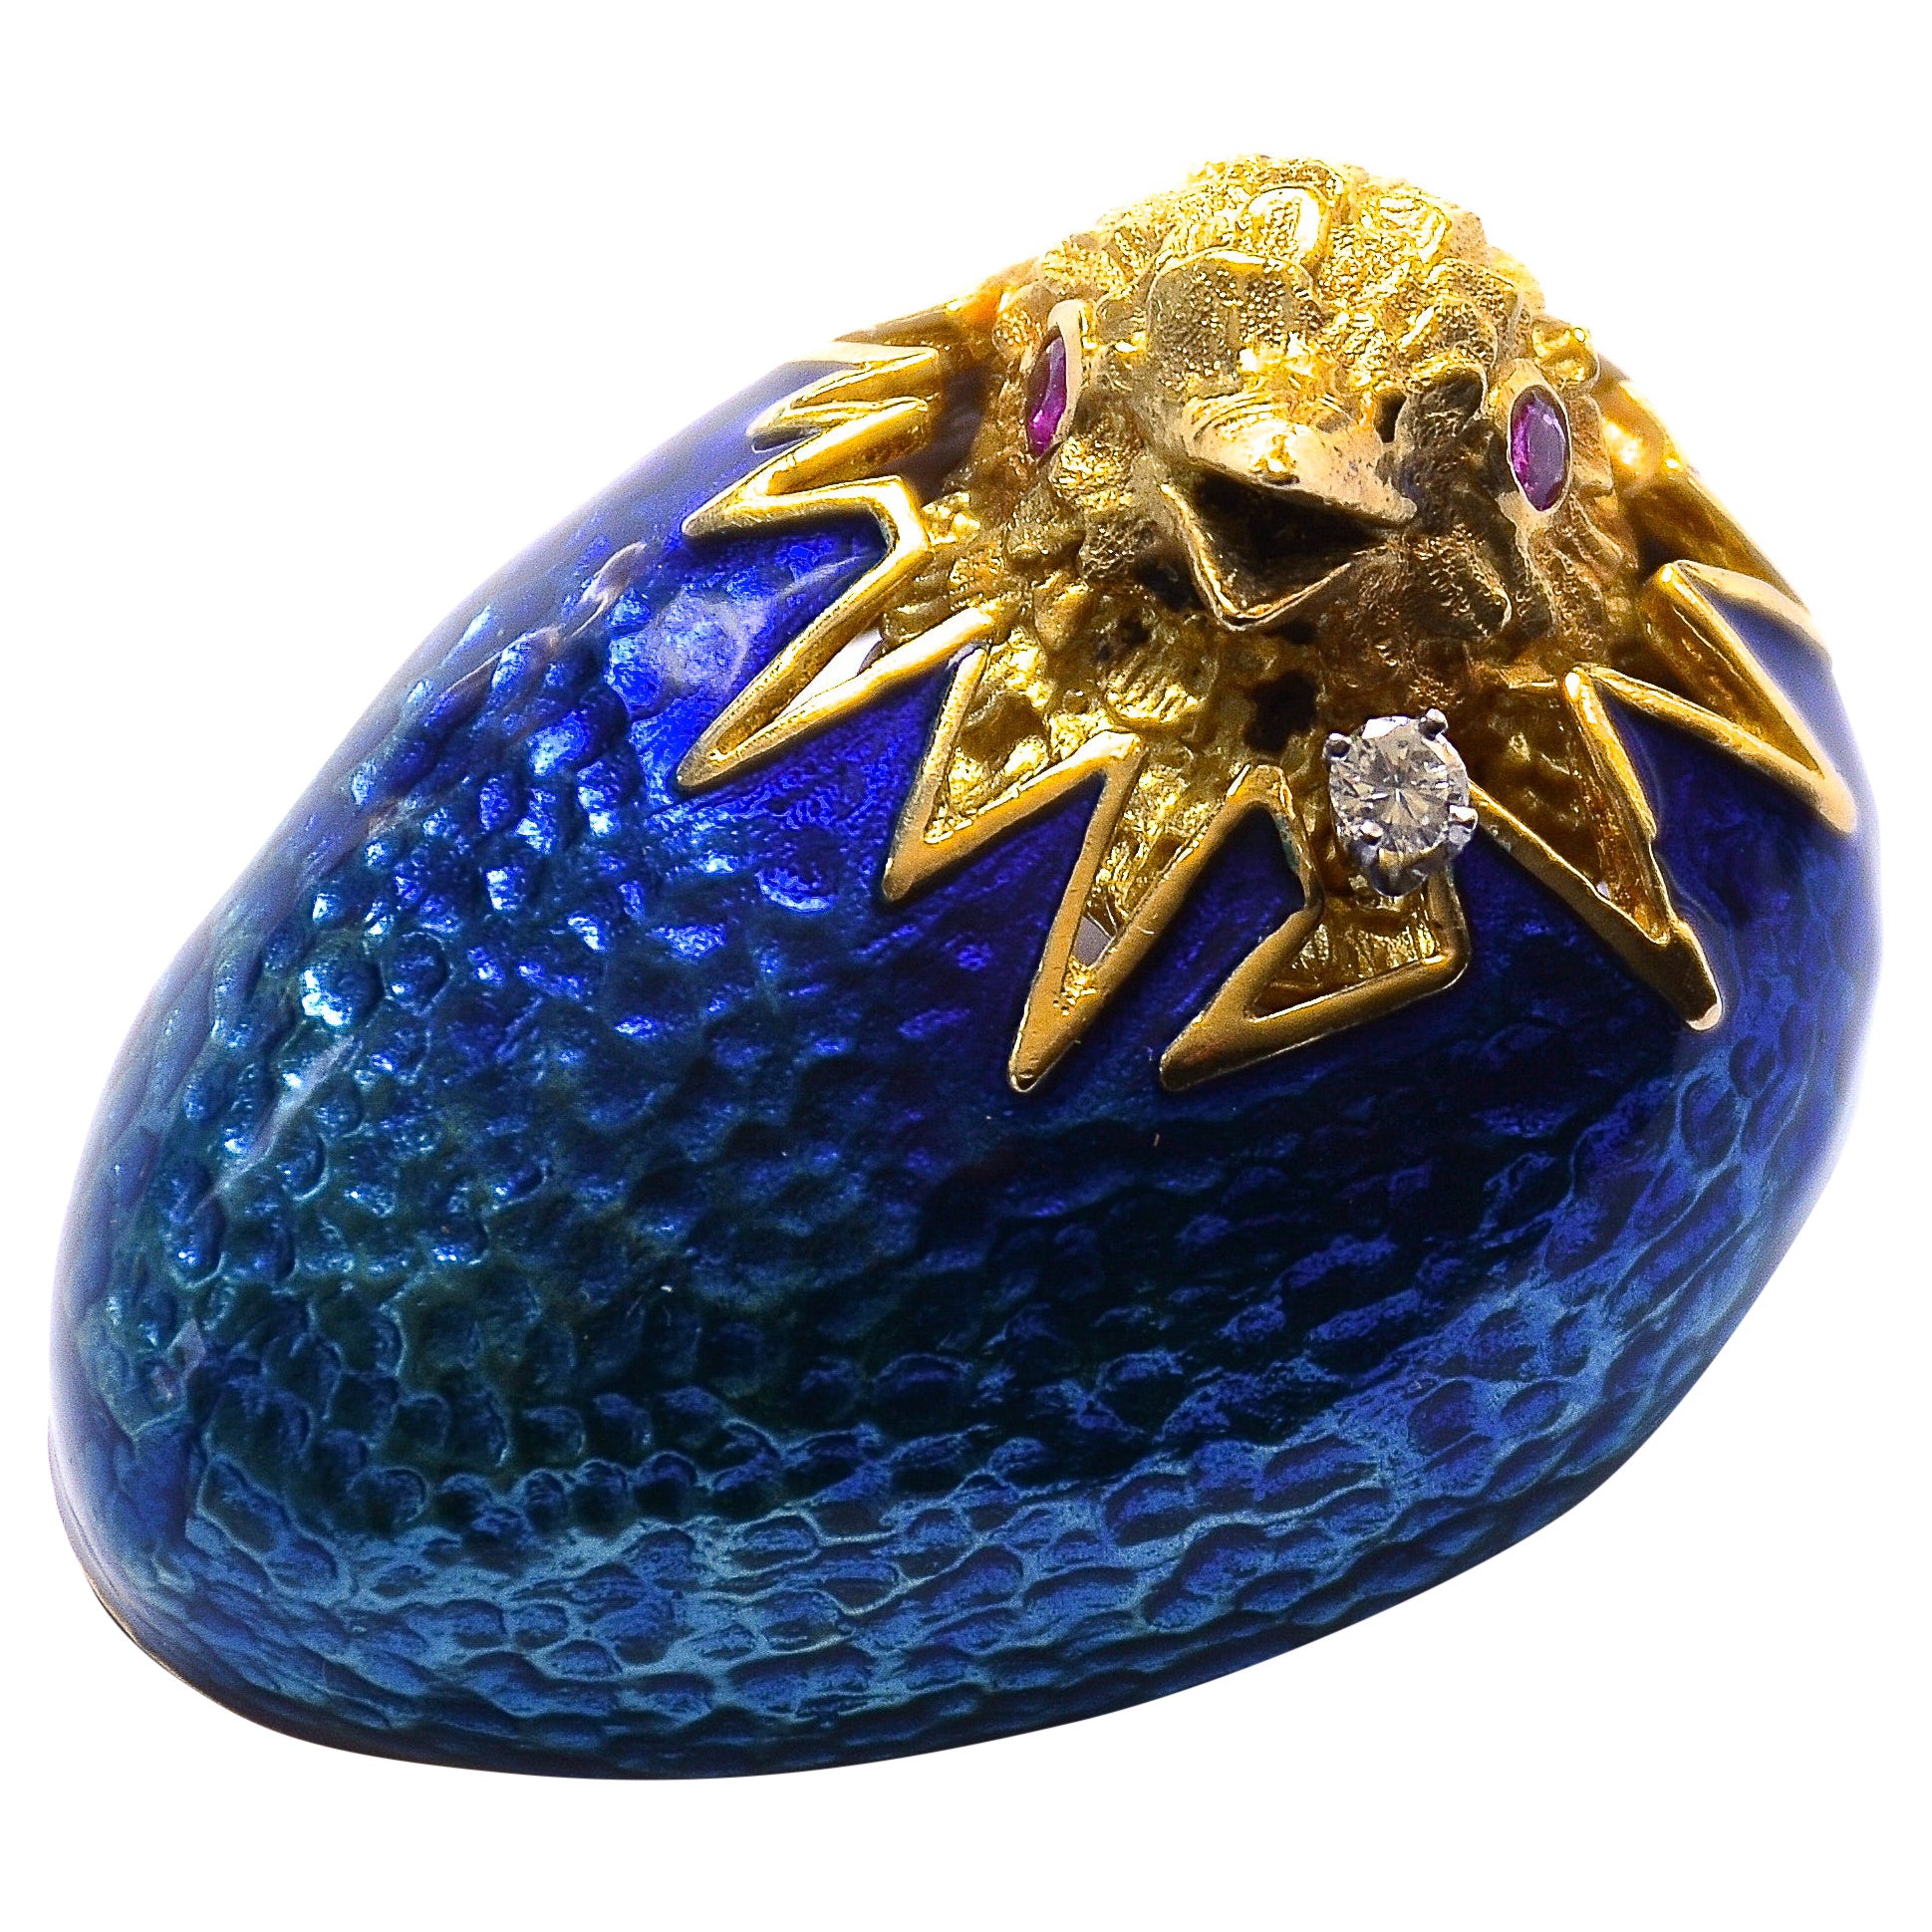 Blue Enameled 18k Egg Featuring a Hatching Chick with a Diamond and Ruby Eyes For Sale